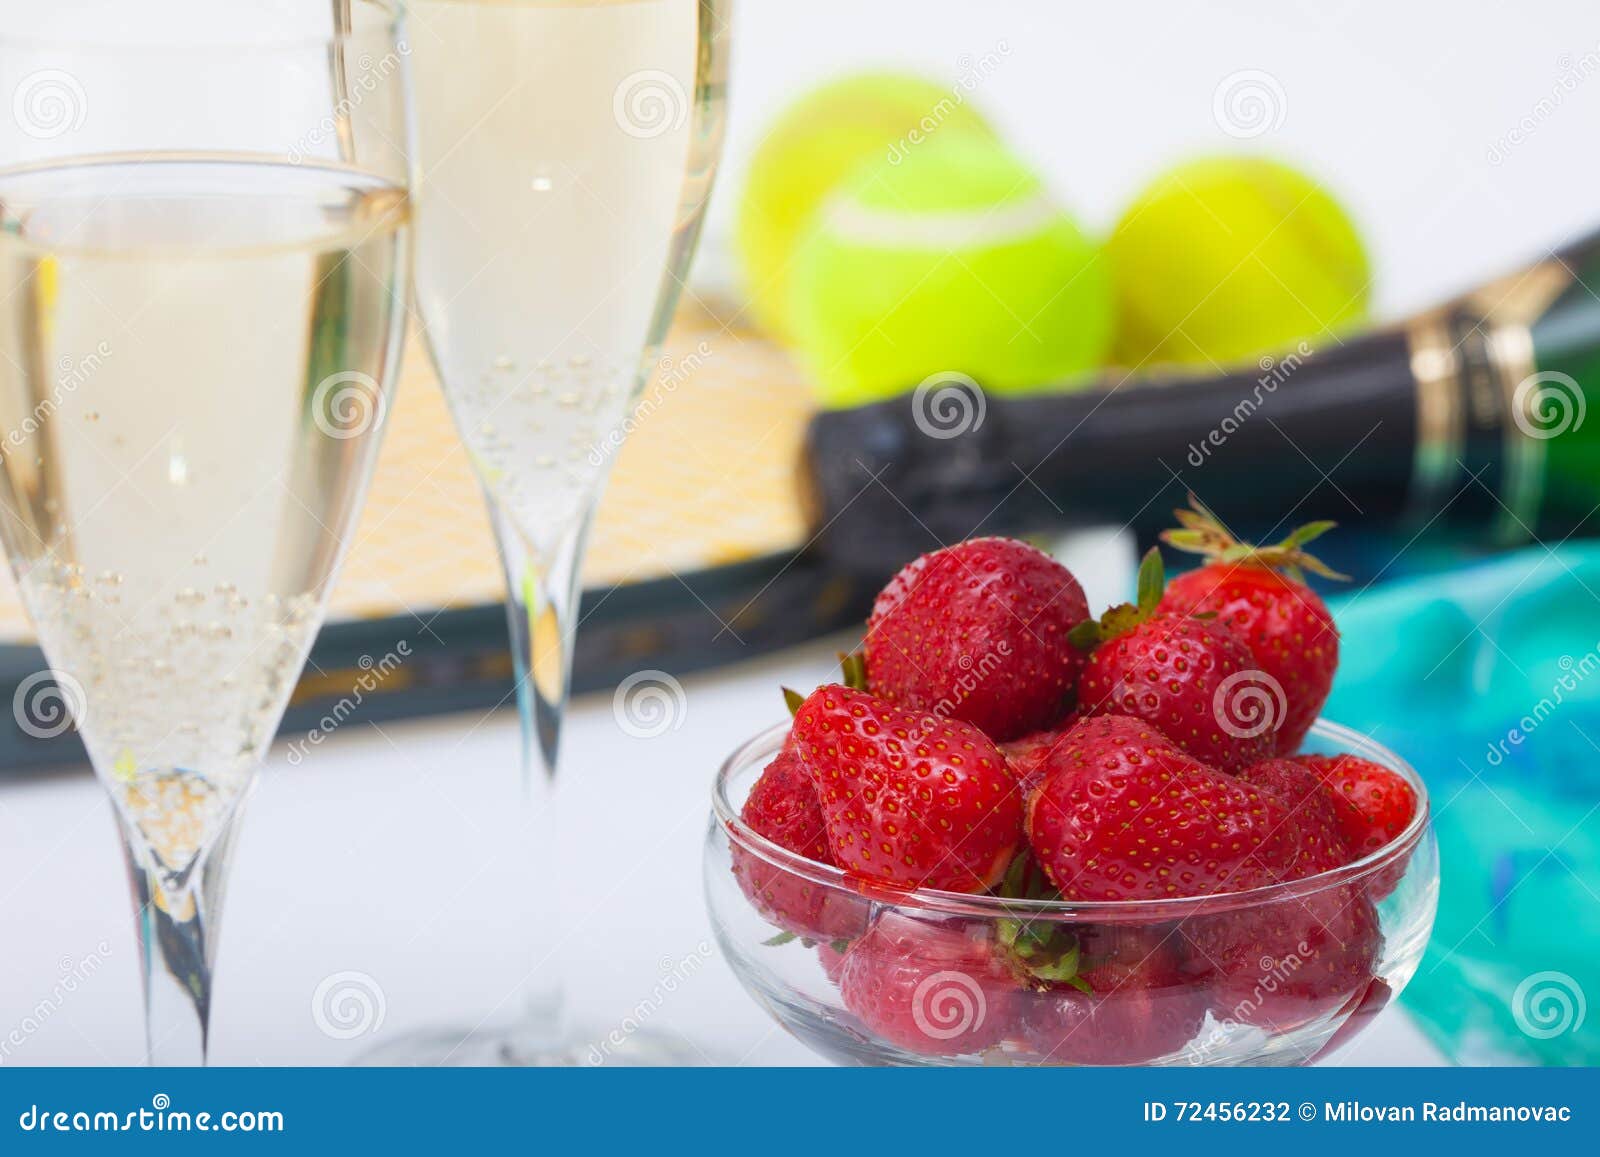 strawberries and champagne during wimbledon